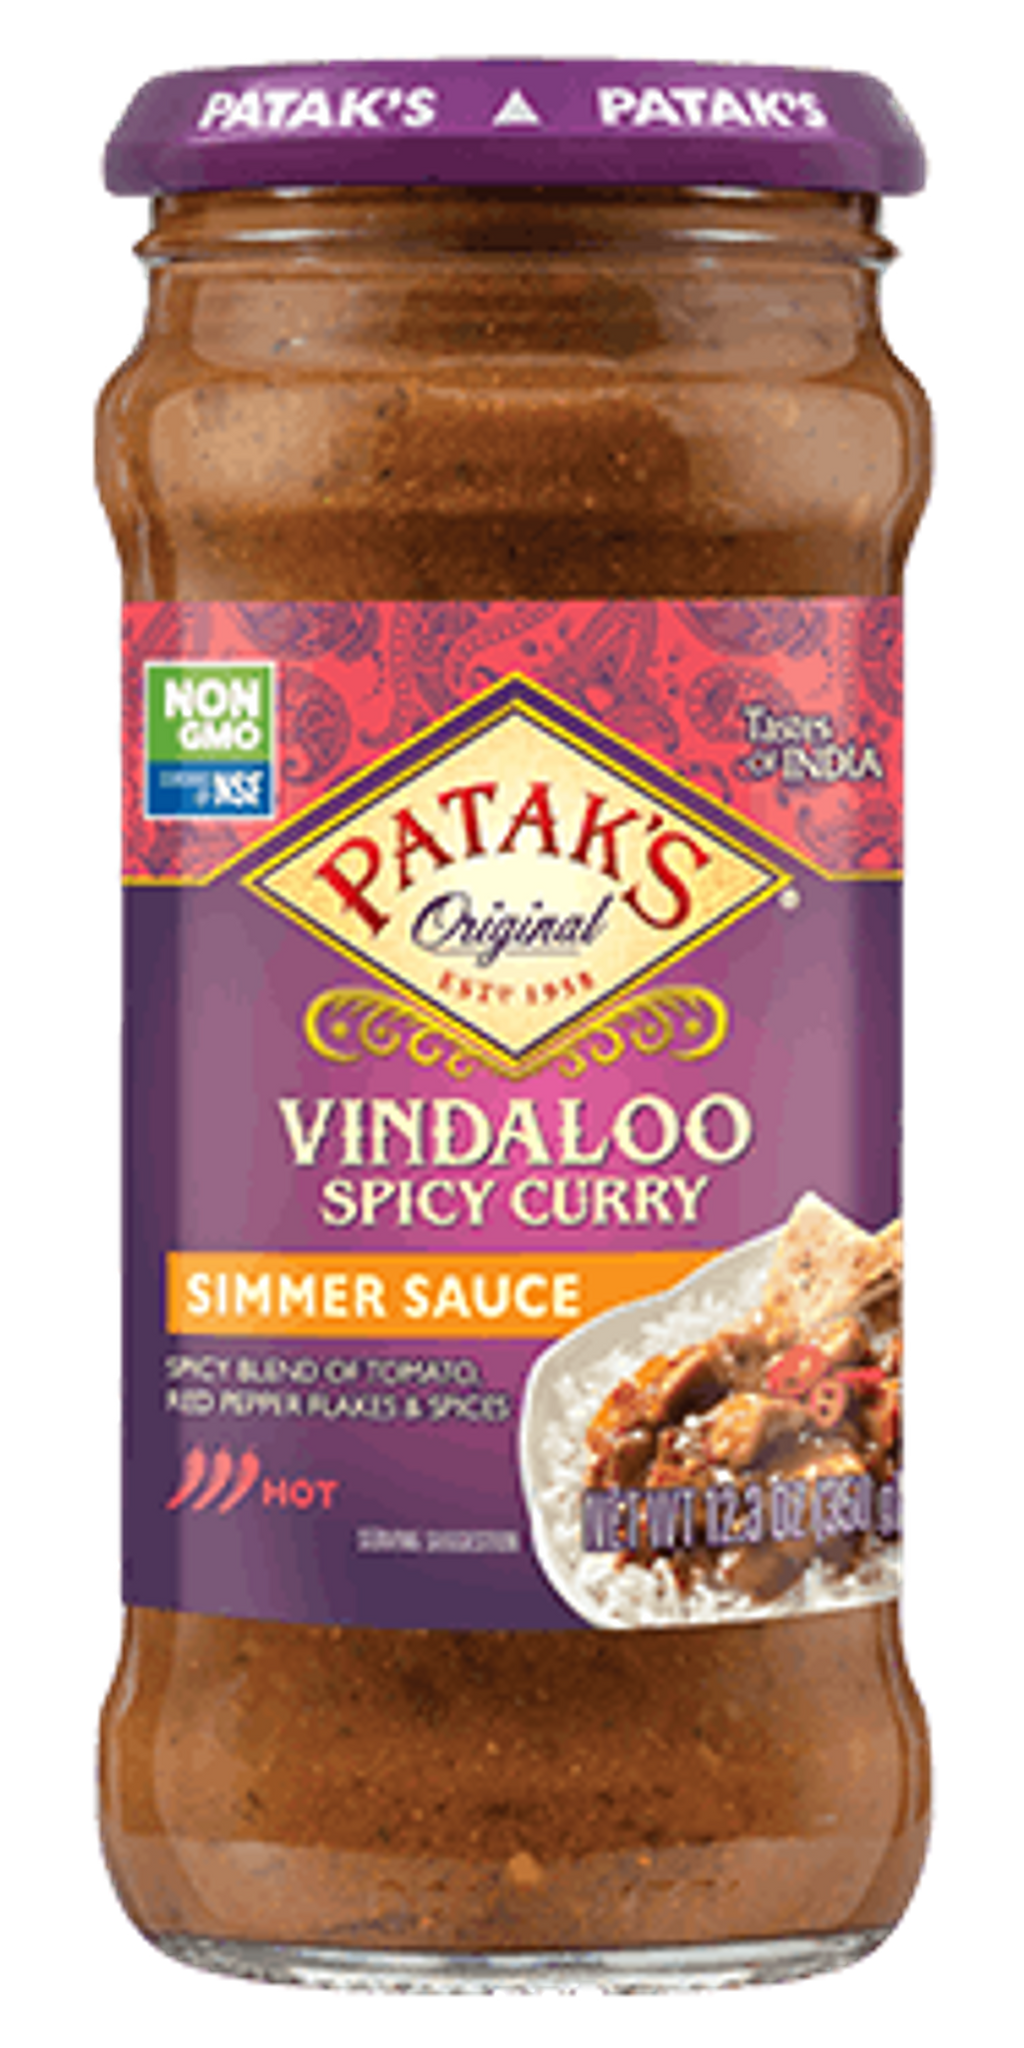 Vindaloo Spicy Curry Simmer Sauce